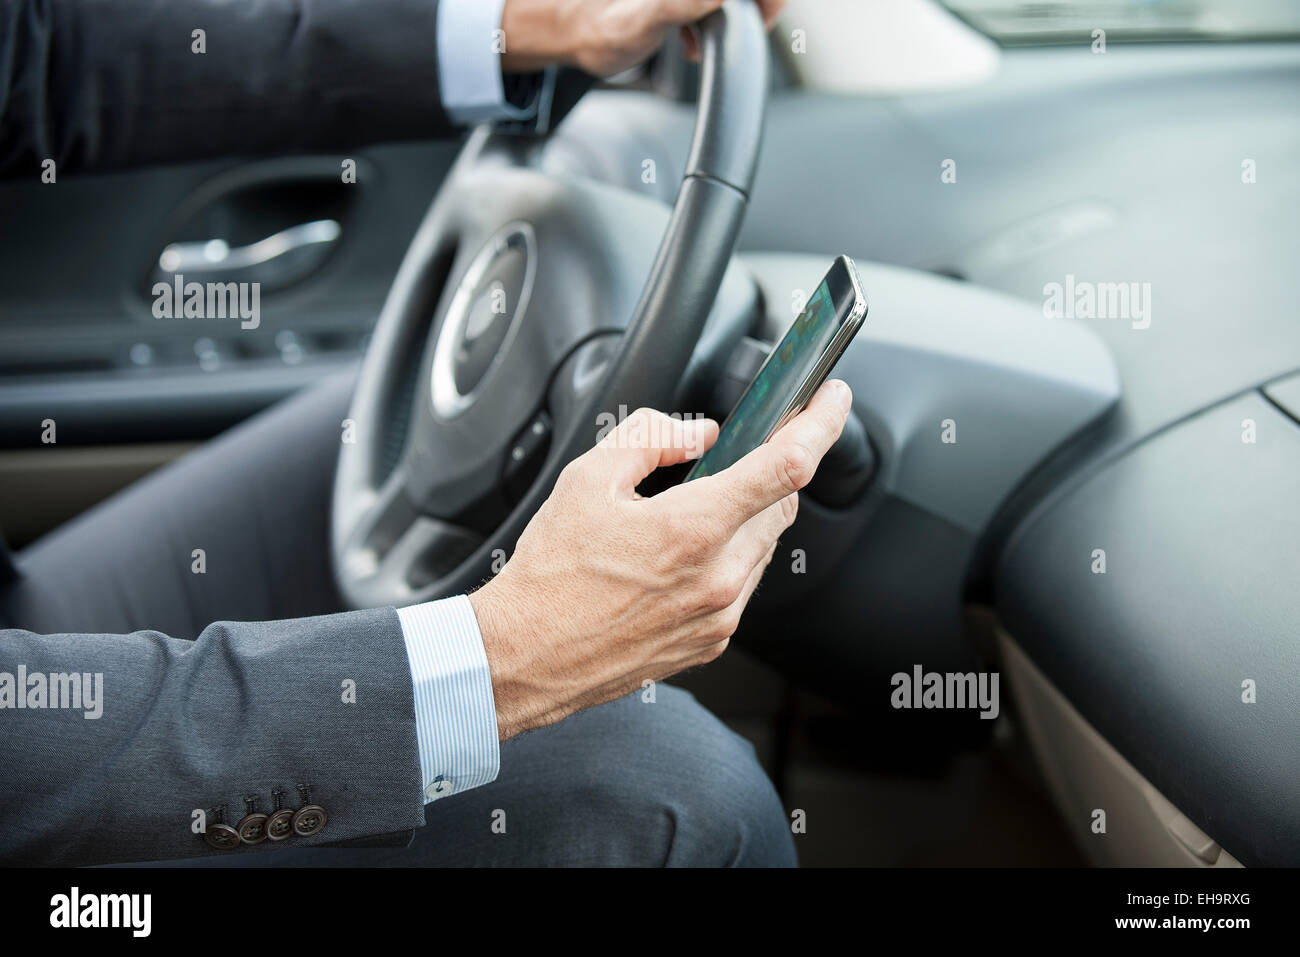 Text-messaging while driving Stock Photo